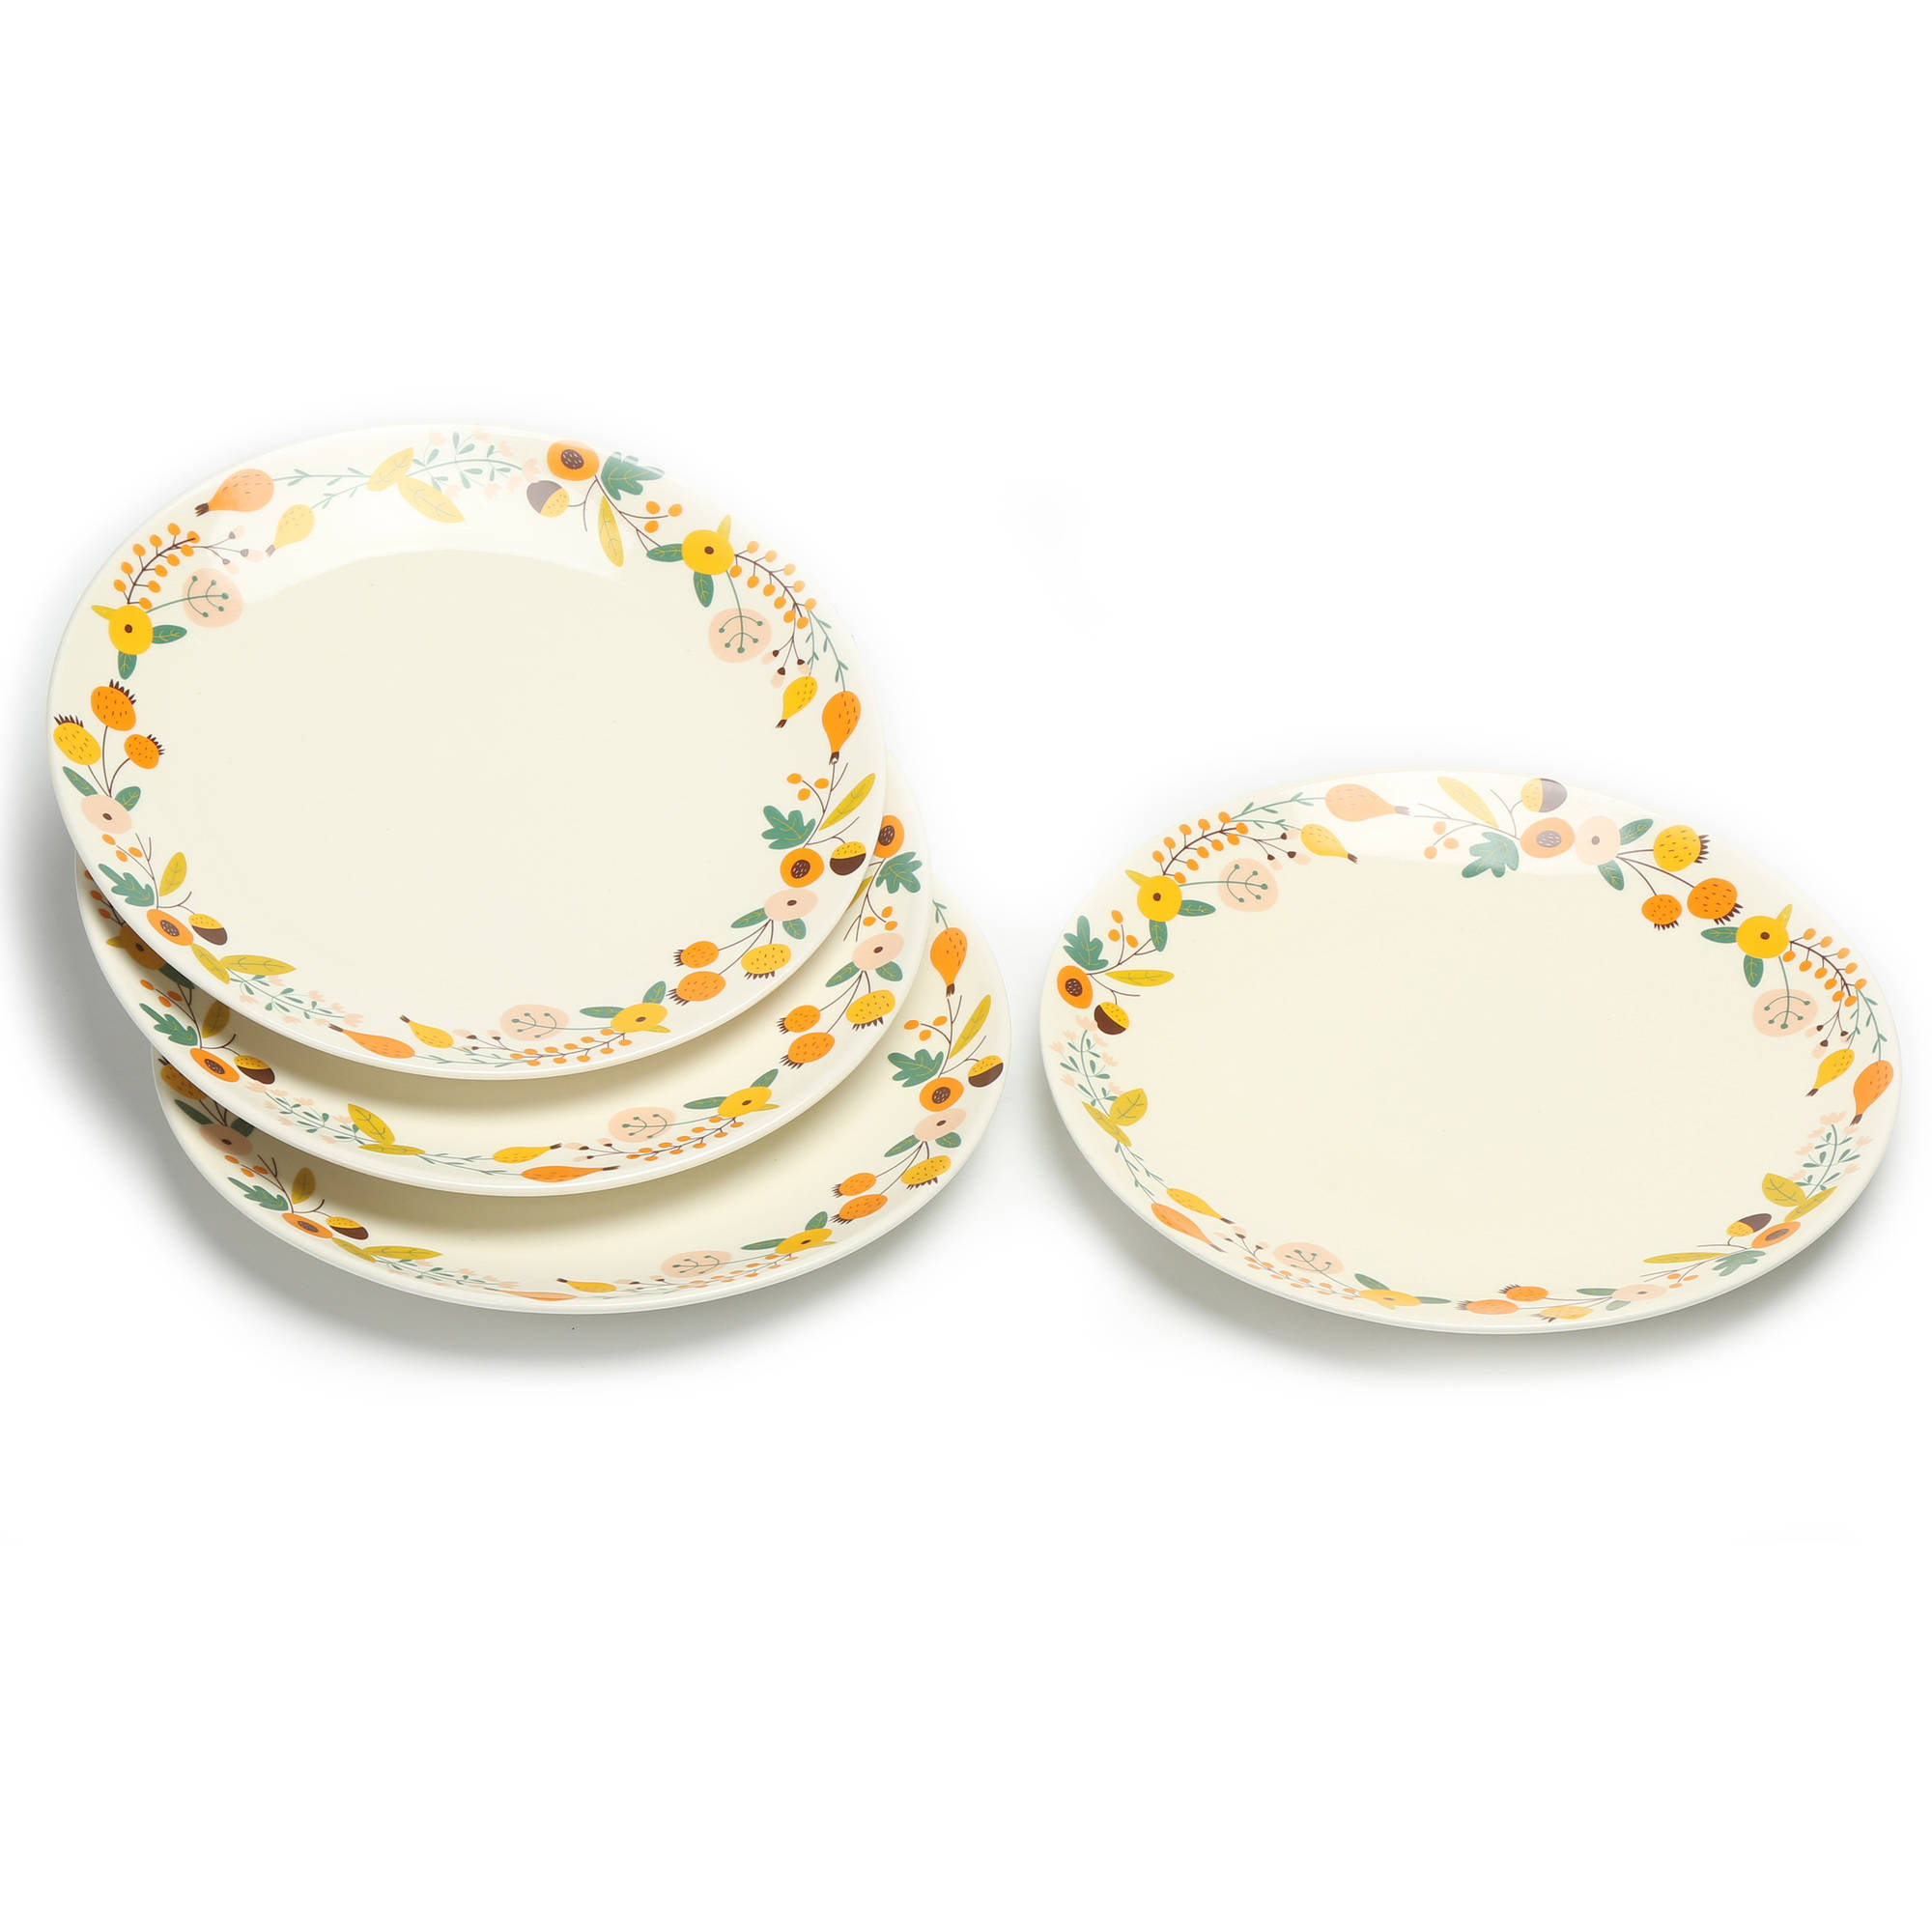 Mainstays 16-Piece Happy Harvest Fall Floral Dinnerware Set - image 2 of 5